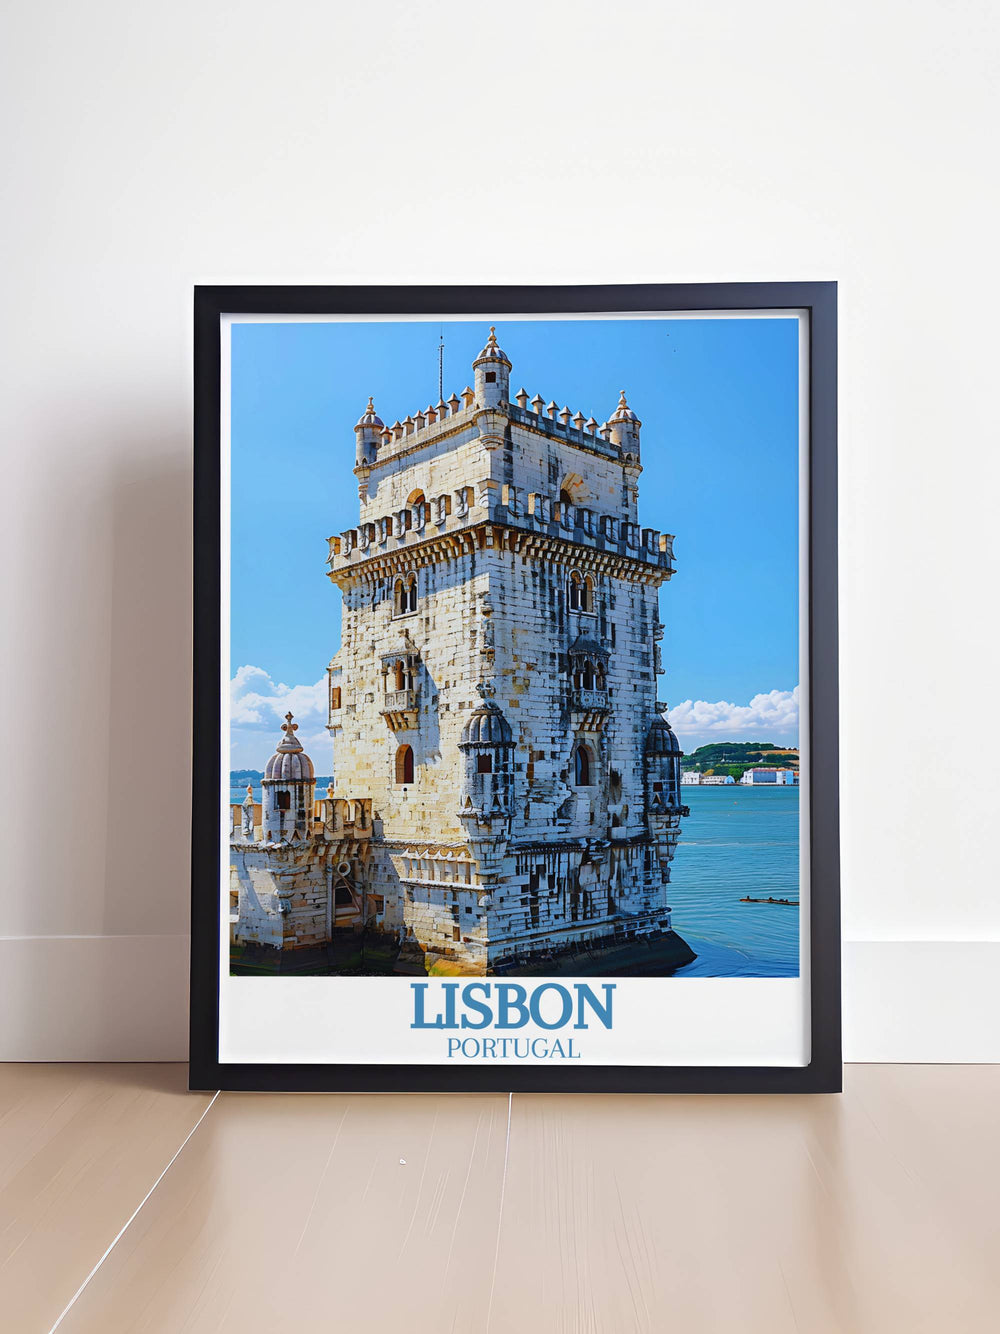 Elevate your home decor with our exquisite Lisbon wall art featuring the Belem Tower Torre de Belem. This artwork highlights the intricate Manueline architecture and rich cultural heritage of one of Portugals most famous landmarks.